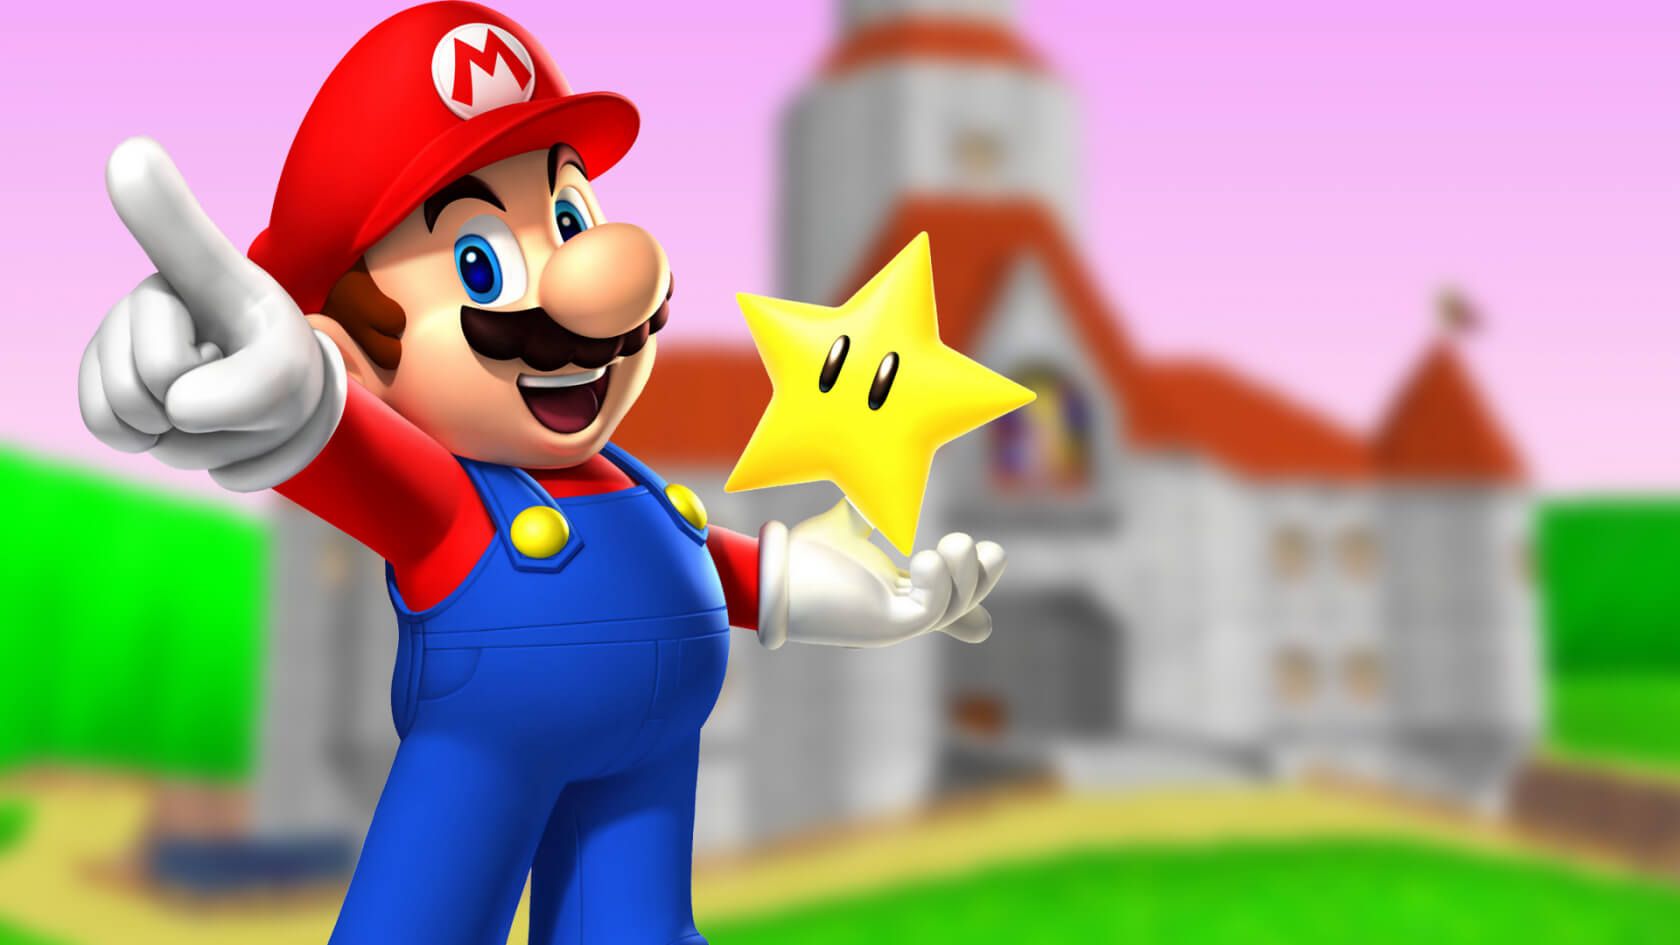 Super Mario Is Coming To The Big Screen, And Hopefully It's Better Than The Last Time